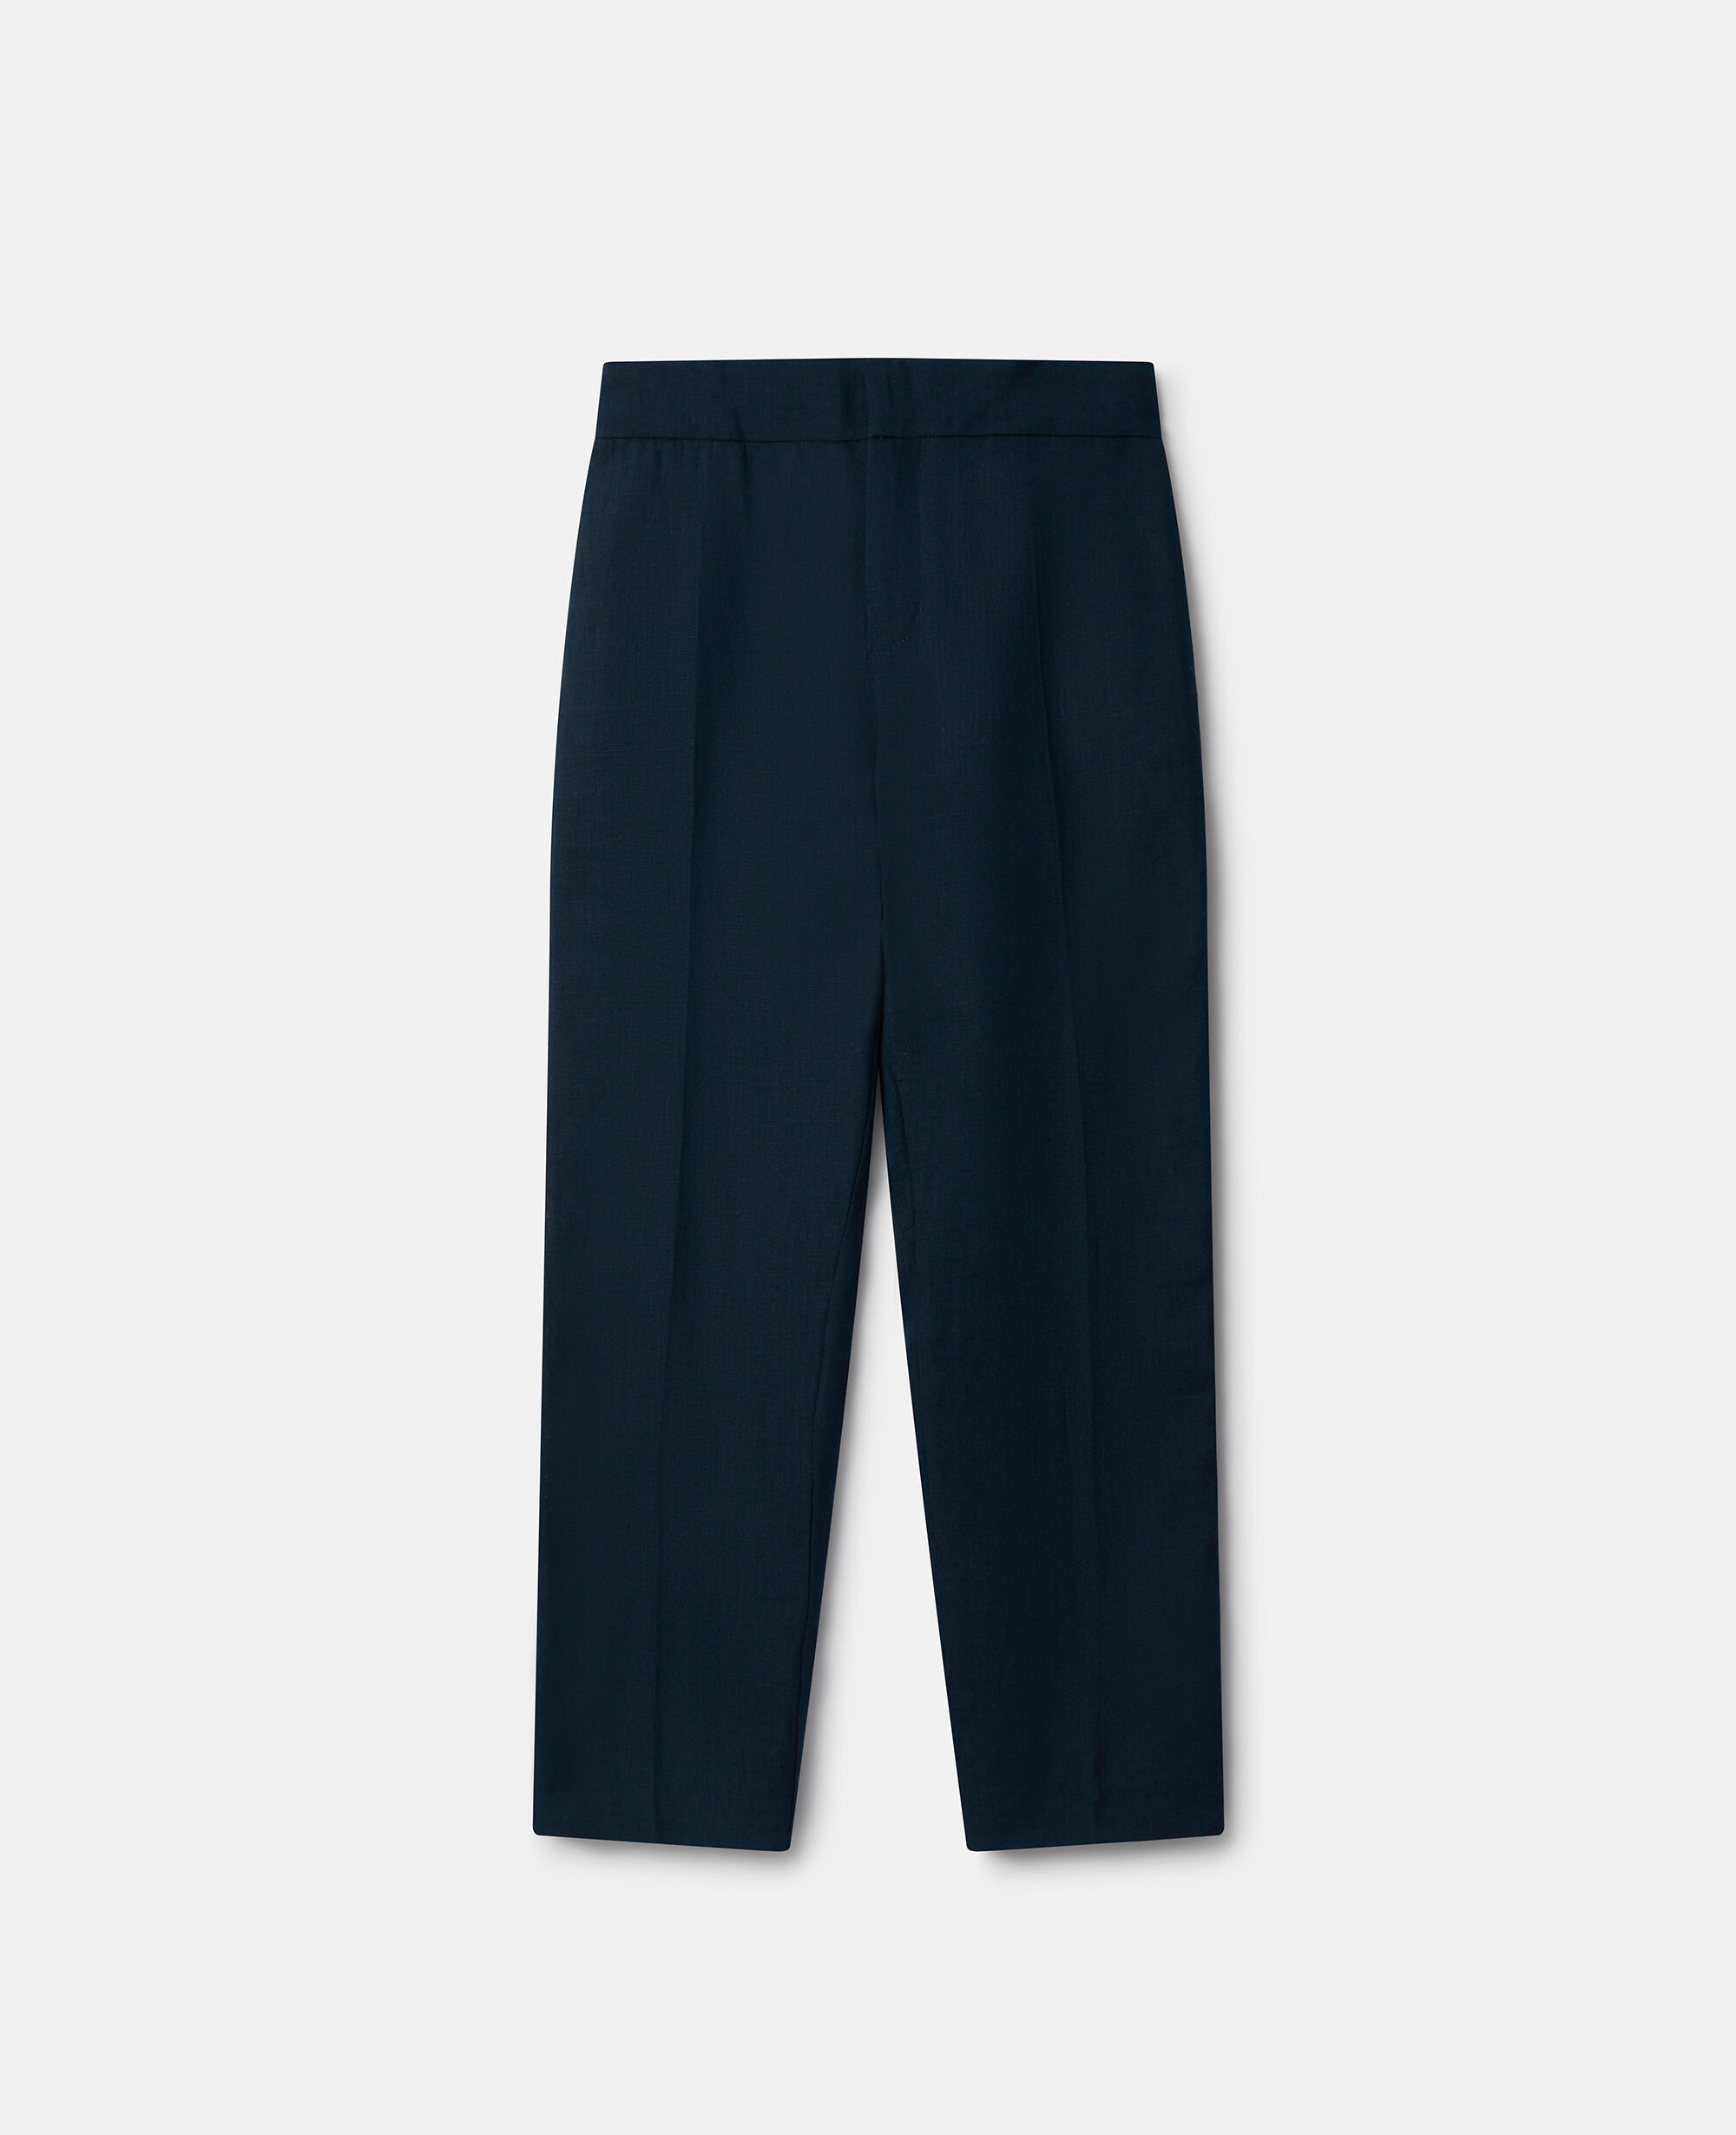 Italian Tailored Fit Navy Stripe Trousers | Buy Online at Moss